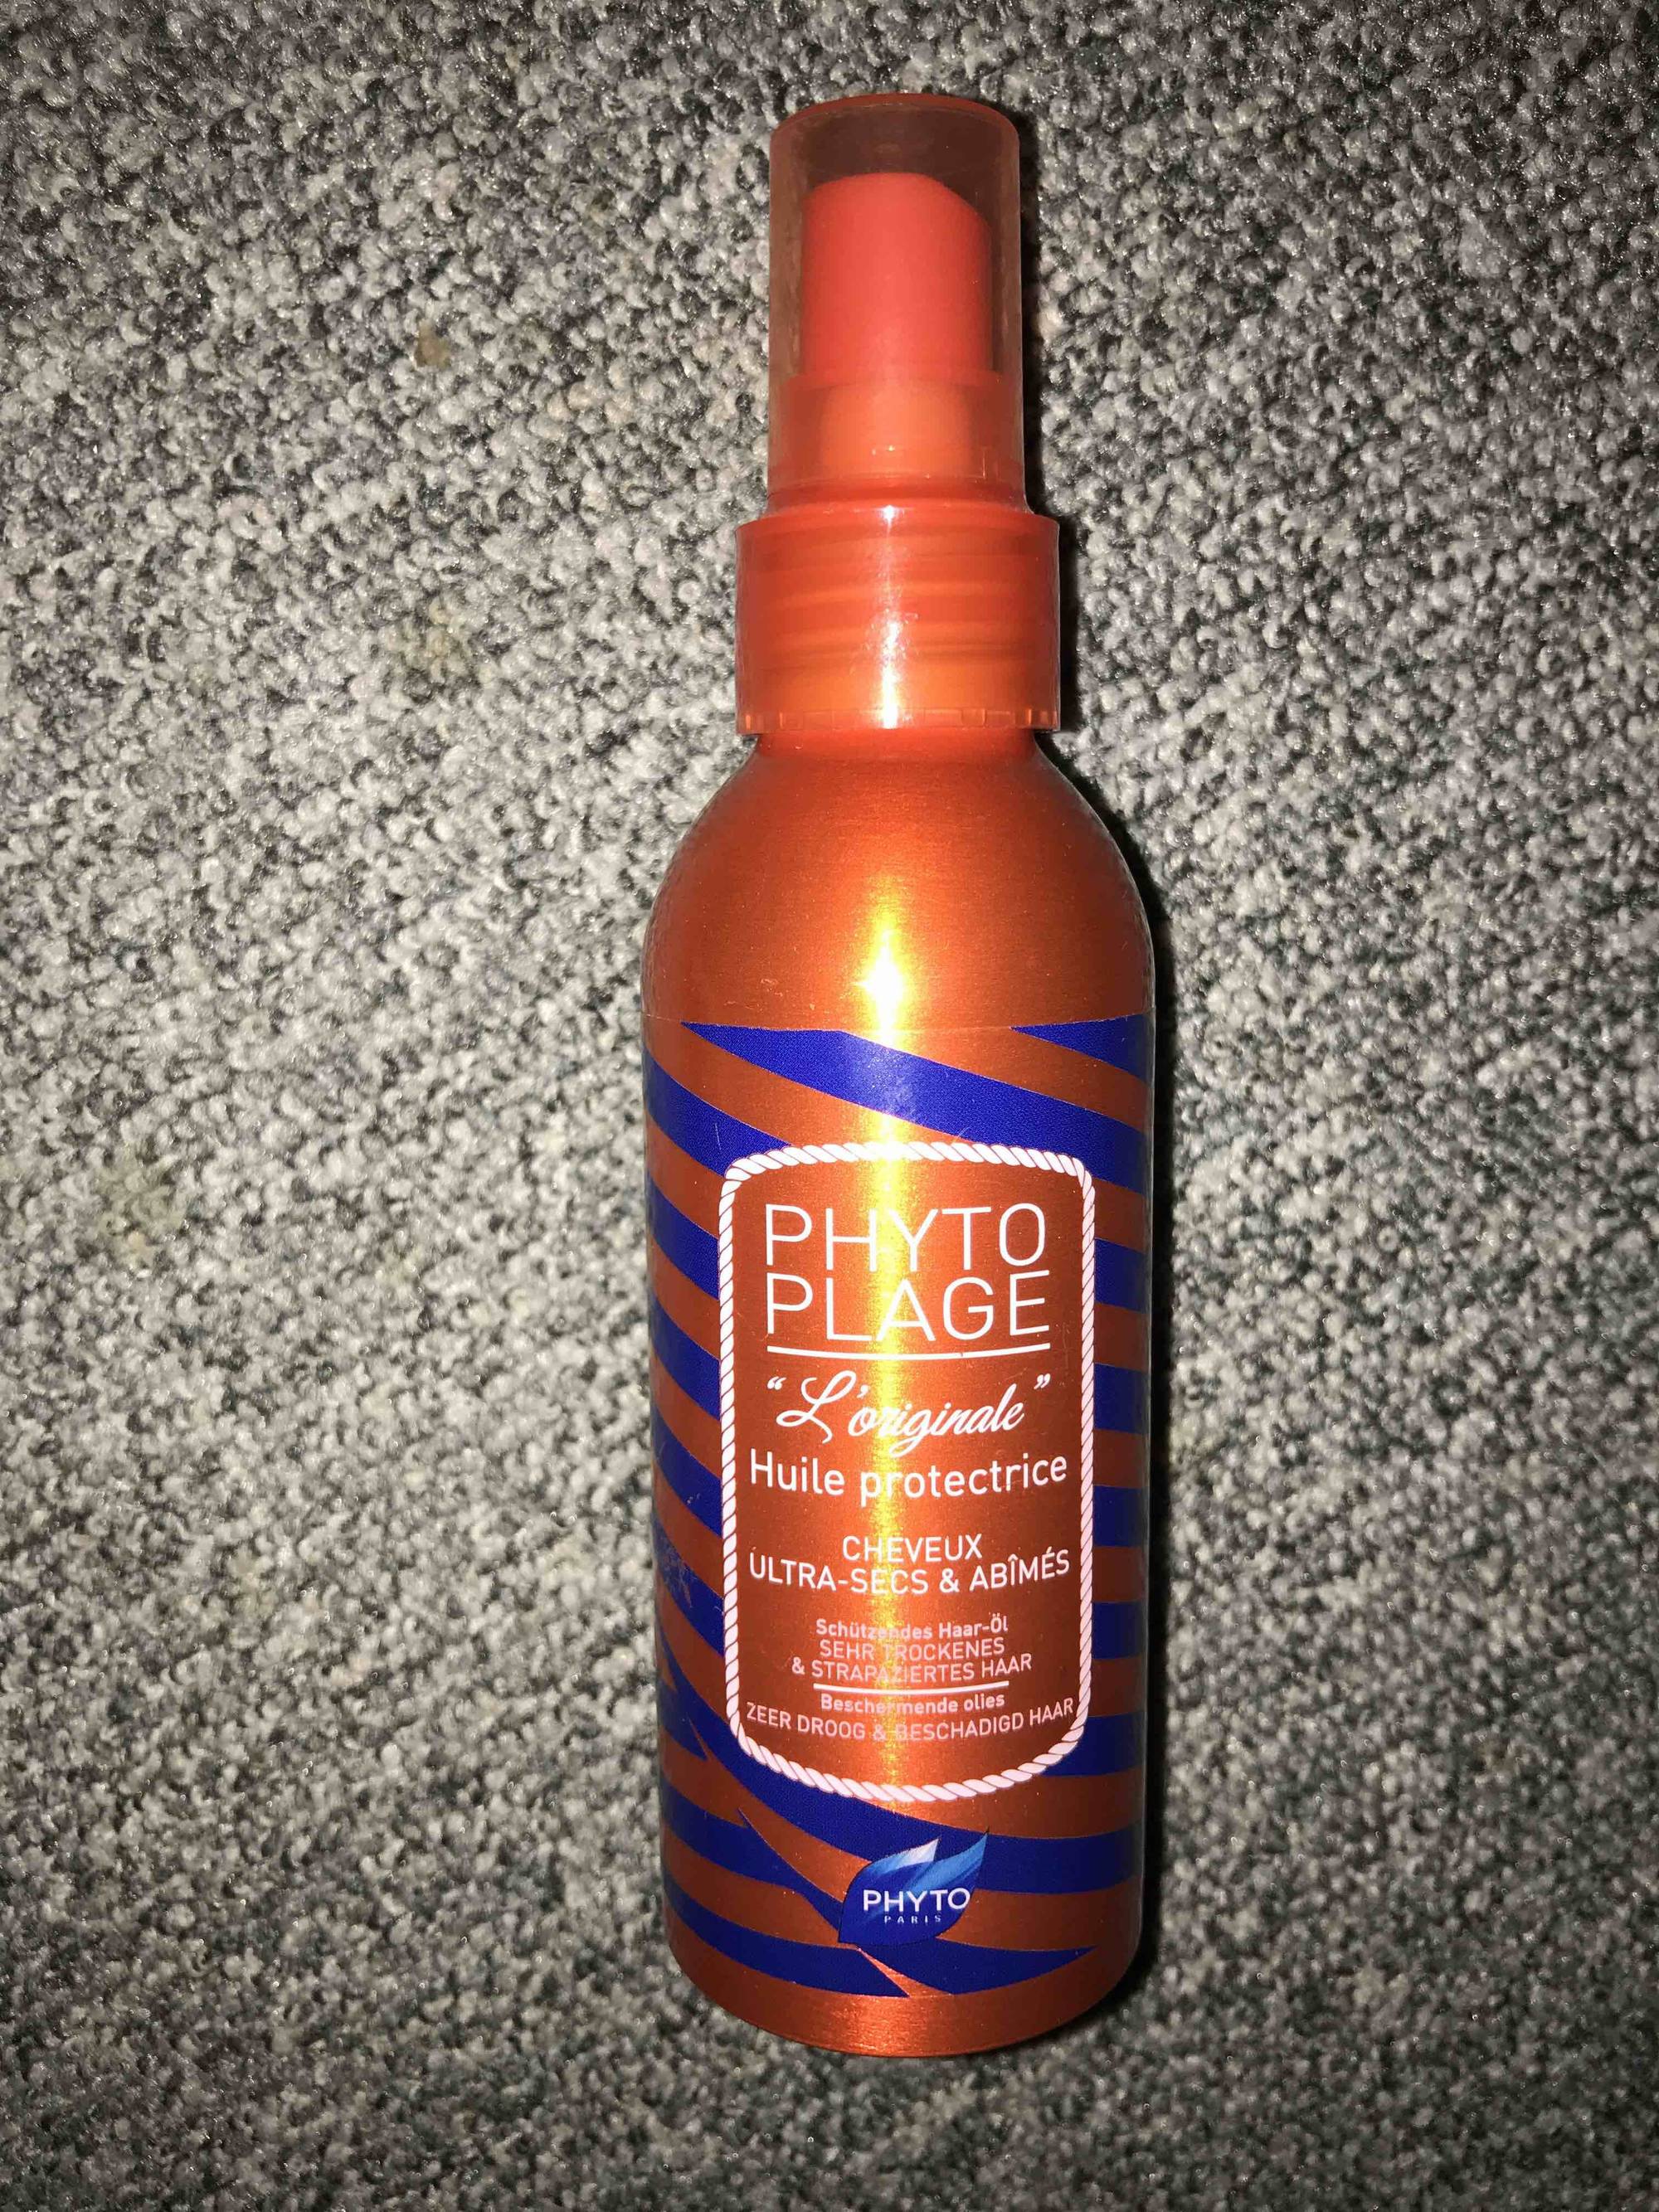 PHYTO - Phyto plage - Huile protectrice cheveux